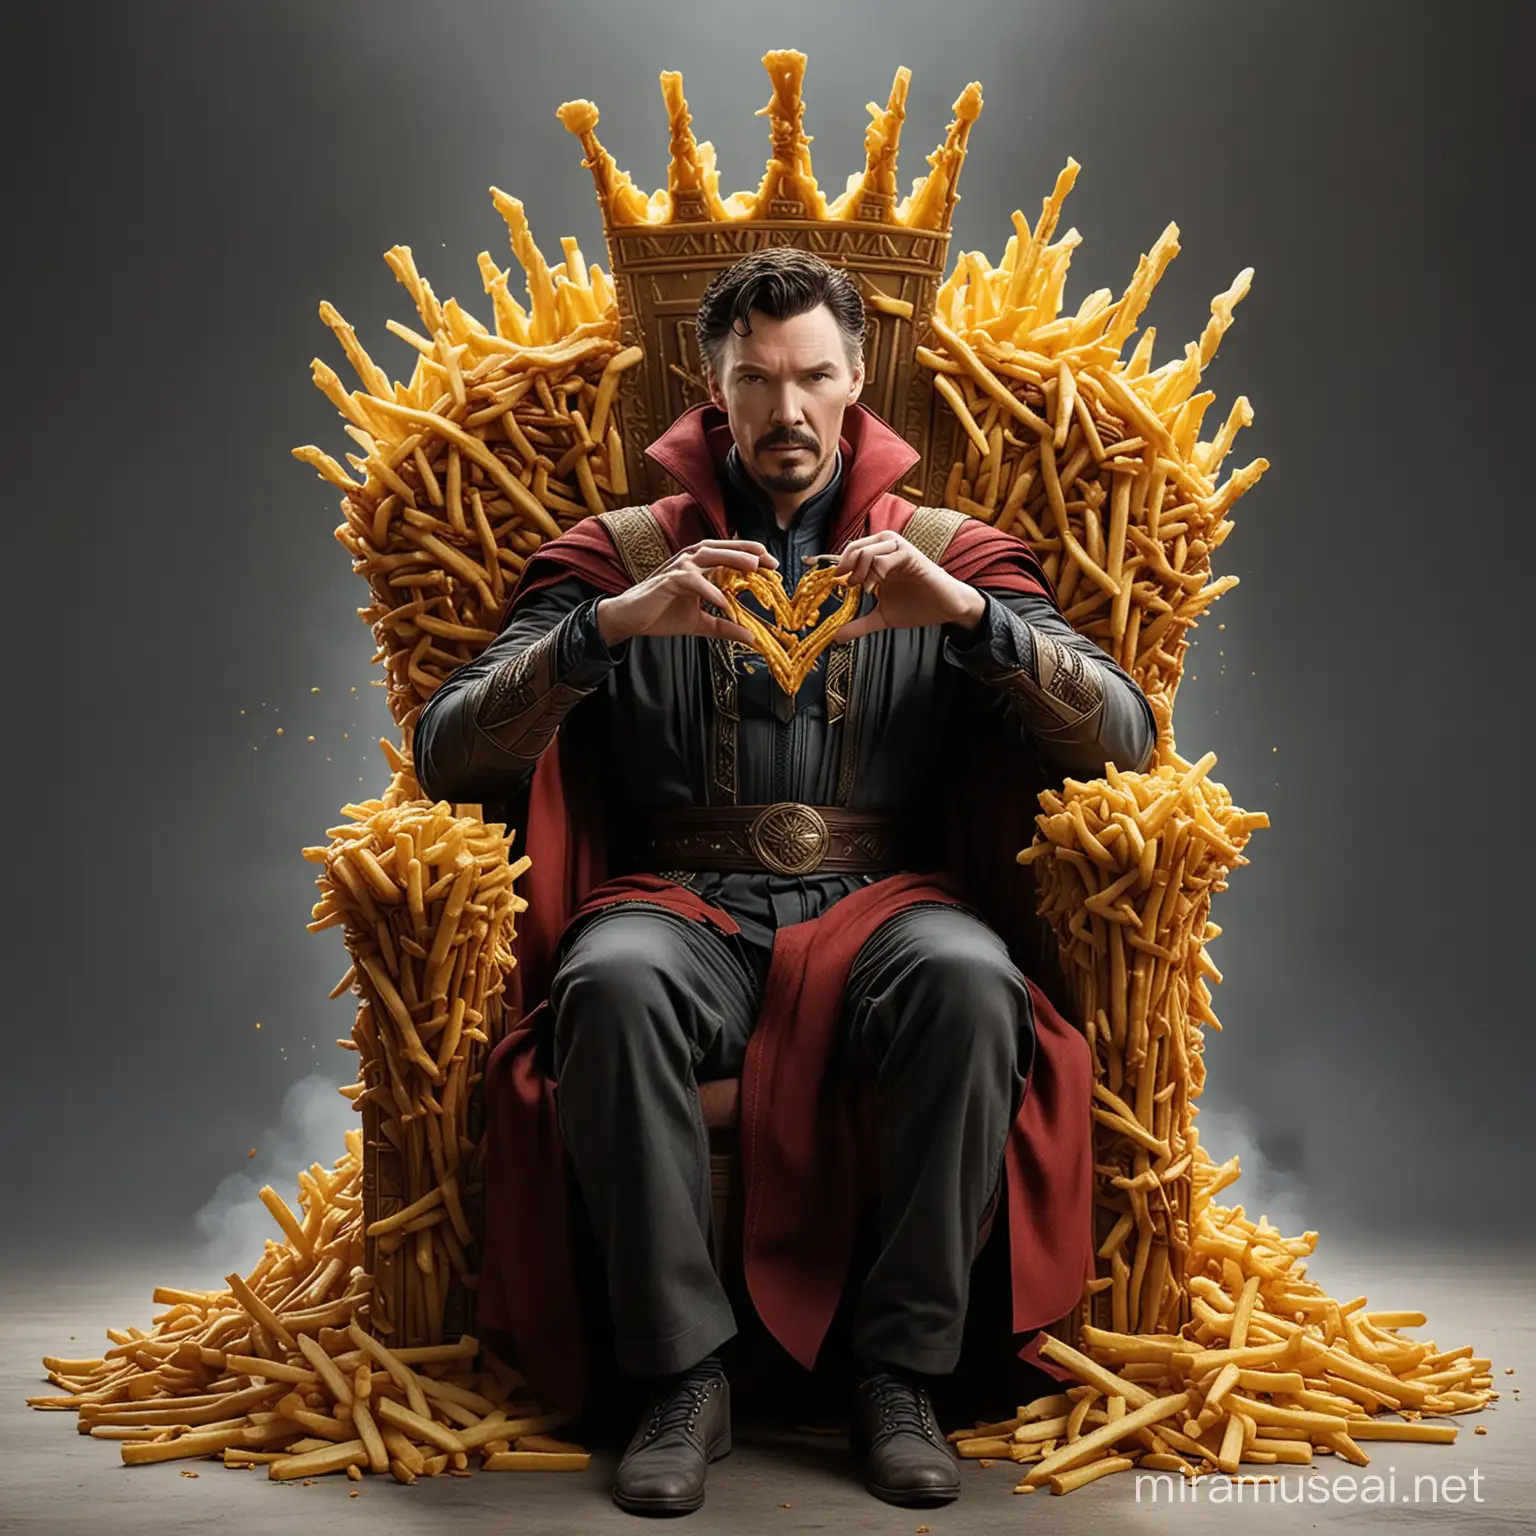 dr. strange in full body sitting in a throne made up of french fries with a crown made up of french fries, hands making a heart sign shape 